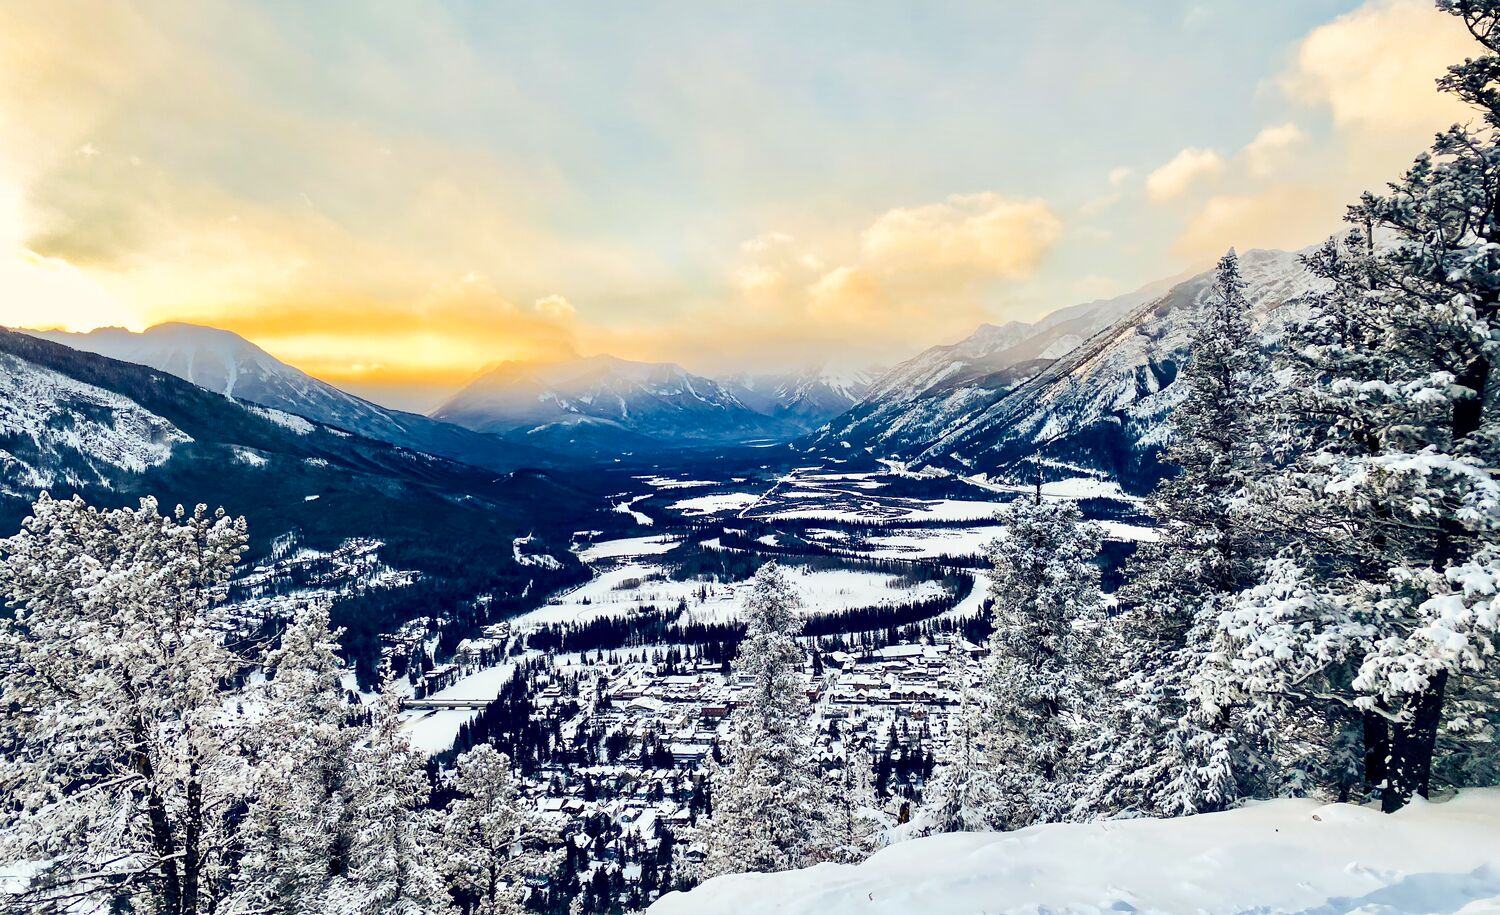 The view from the top of Tunnel Mountain at sunset in Banff National Park.